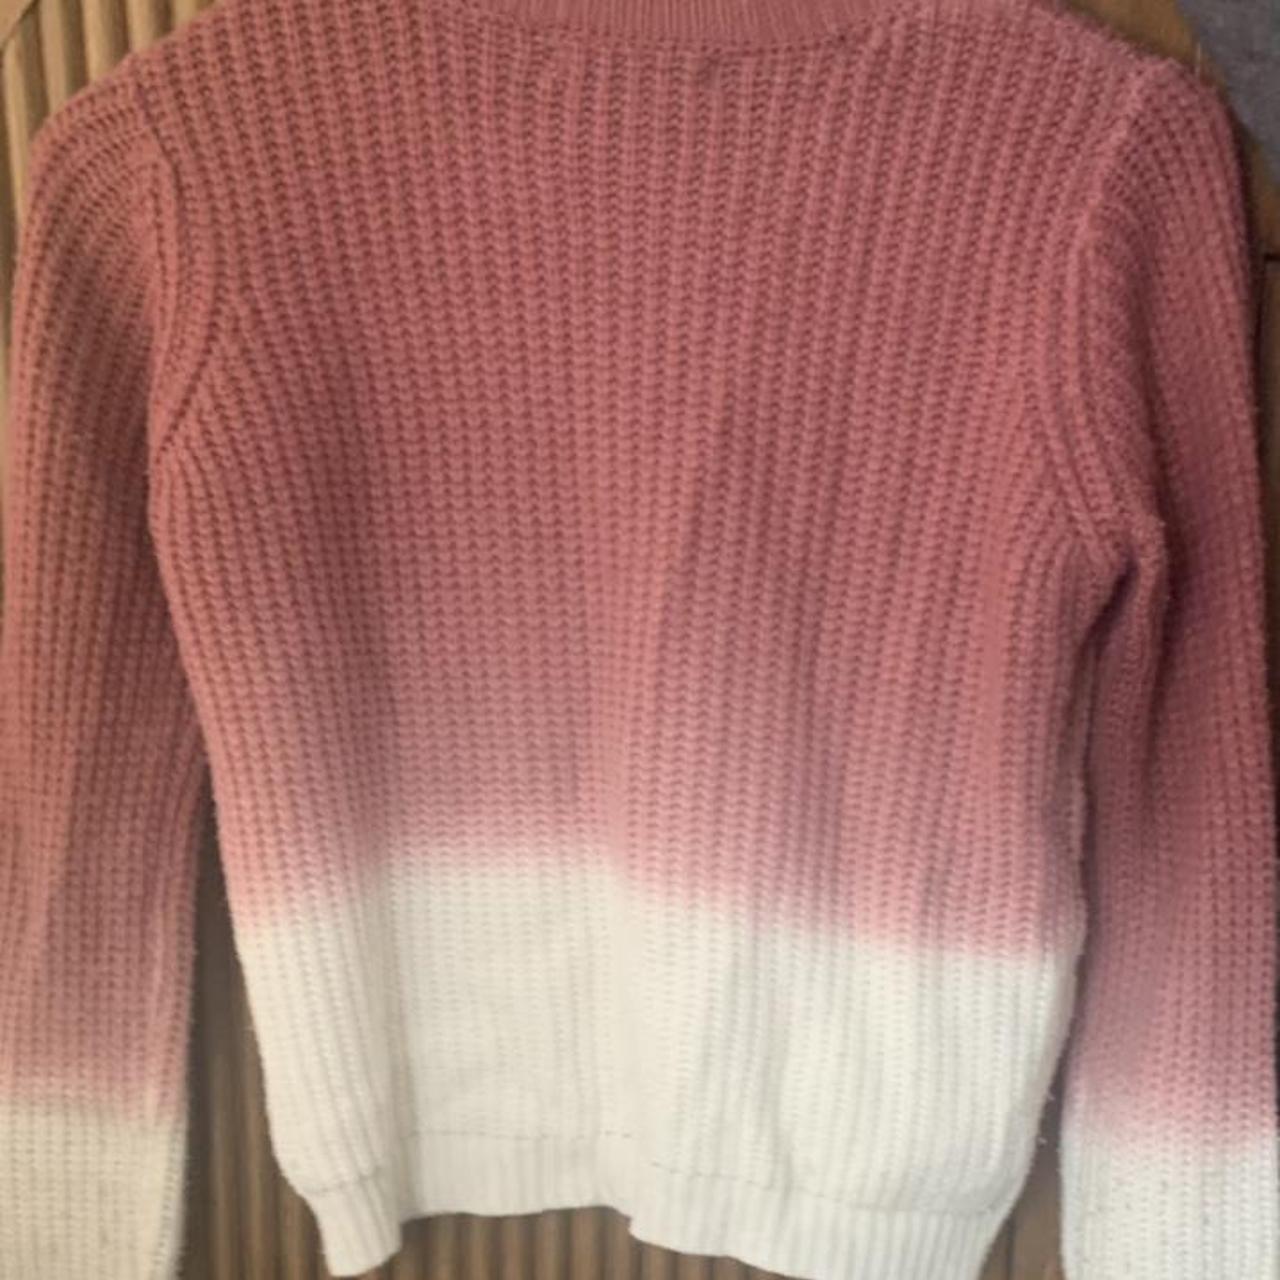 Product Image 3 - Woven Heart Ombre Sweater <3

-Fits